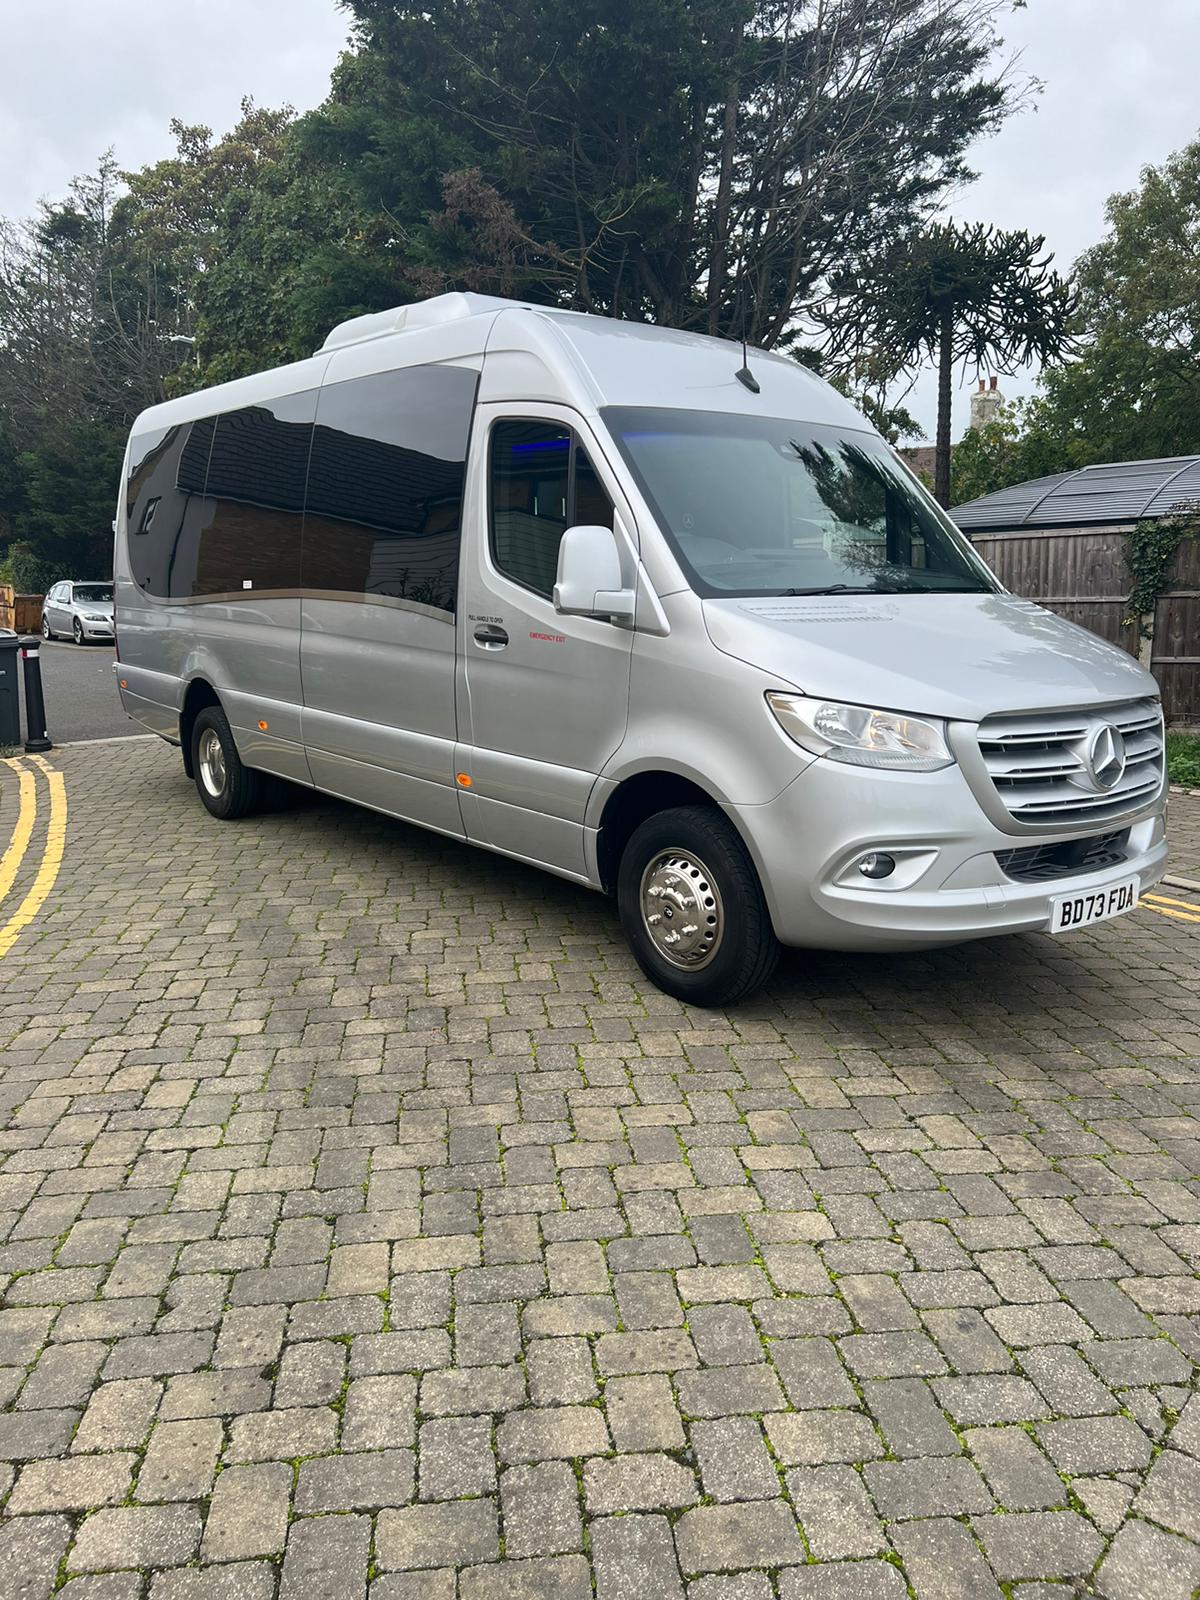 Top Benefits of Minibus Hire for Group Travel in the UK